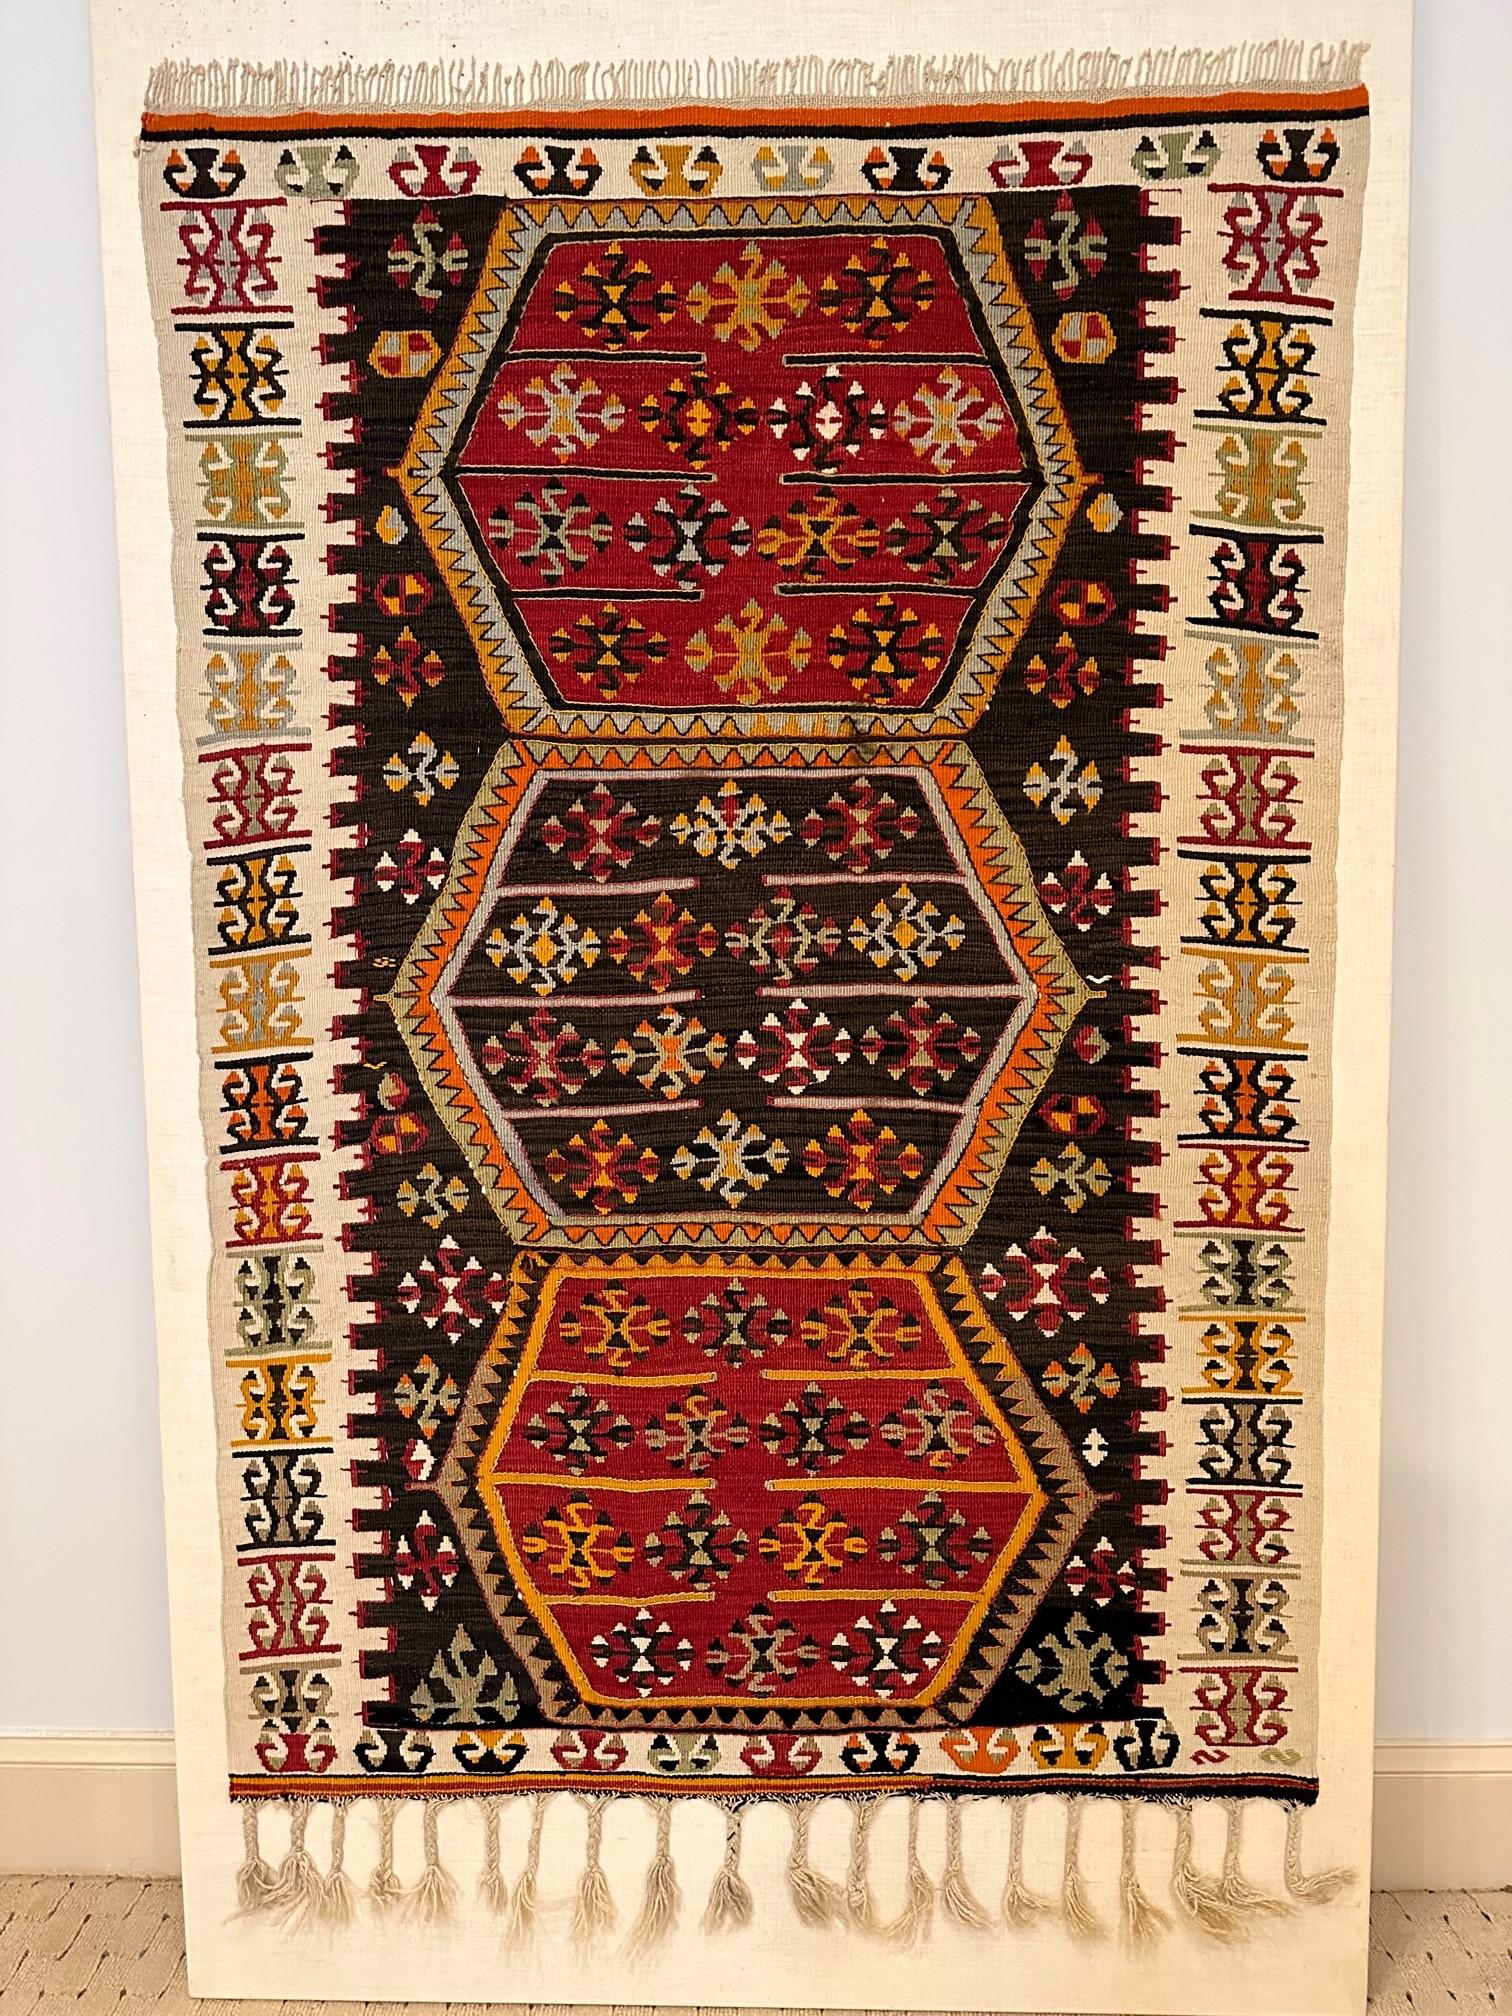 An antique Eastern Turkish wool kilim rug from Anatolia region circa 19th century. The finely woven rug is professionally mounted on a linen-backed canvas for display. The tribal weaving features three stacked hexagons in the center field with